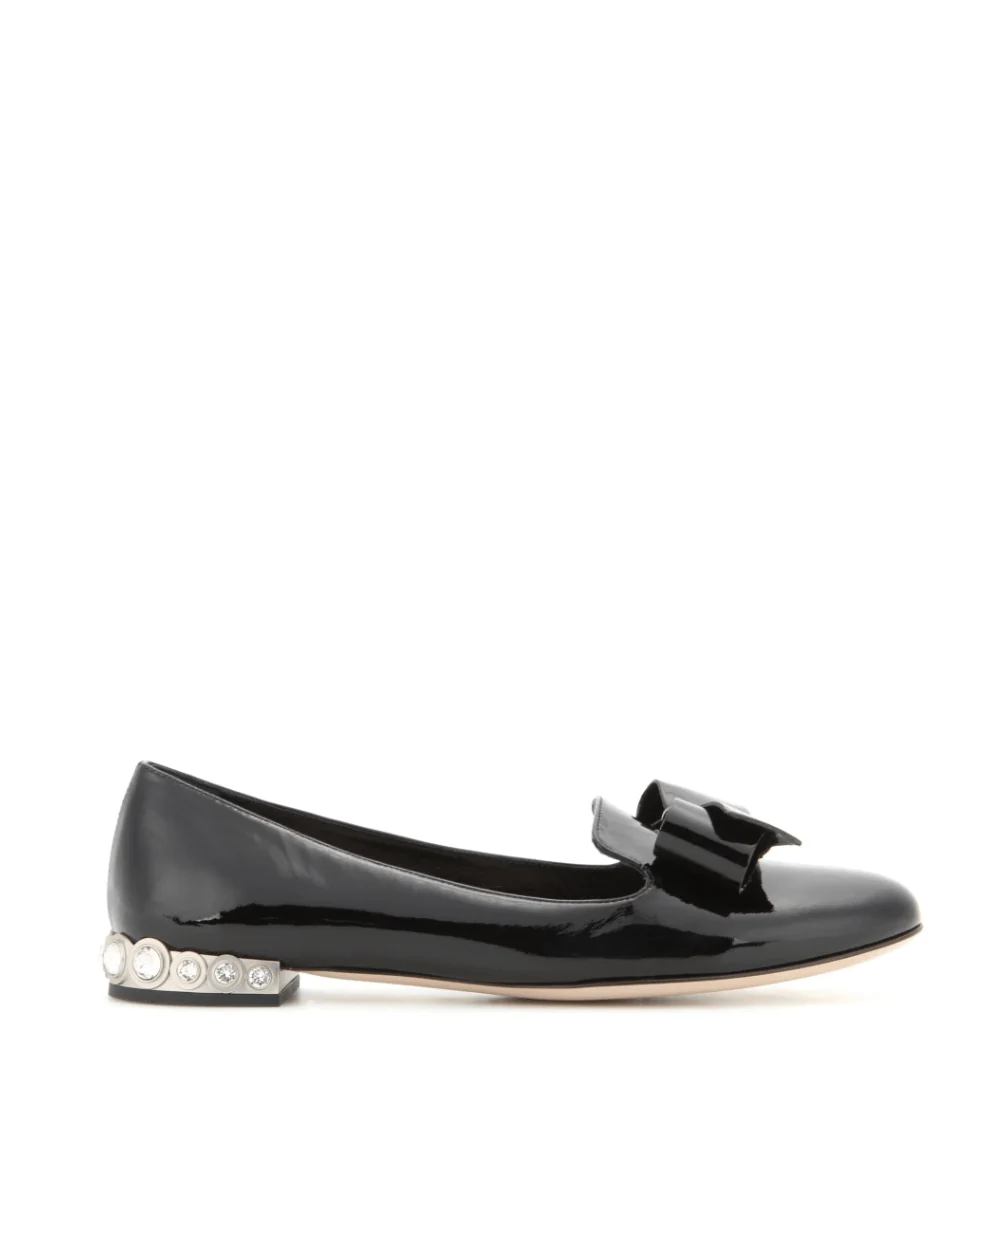 Miu Miu Patent Leather Slippers With Crystal-embellished Heel